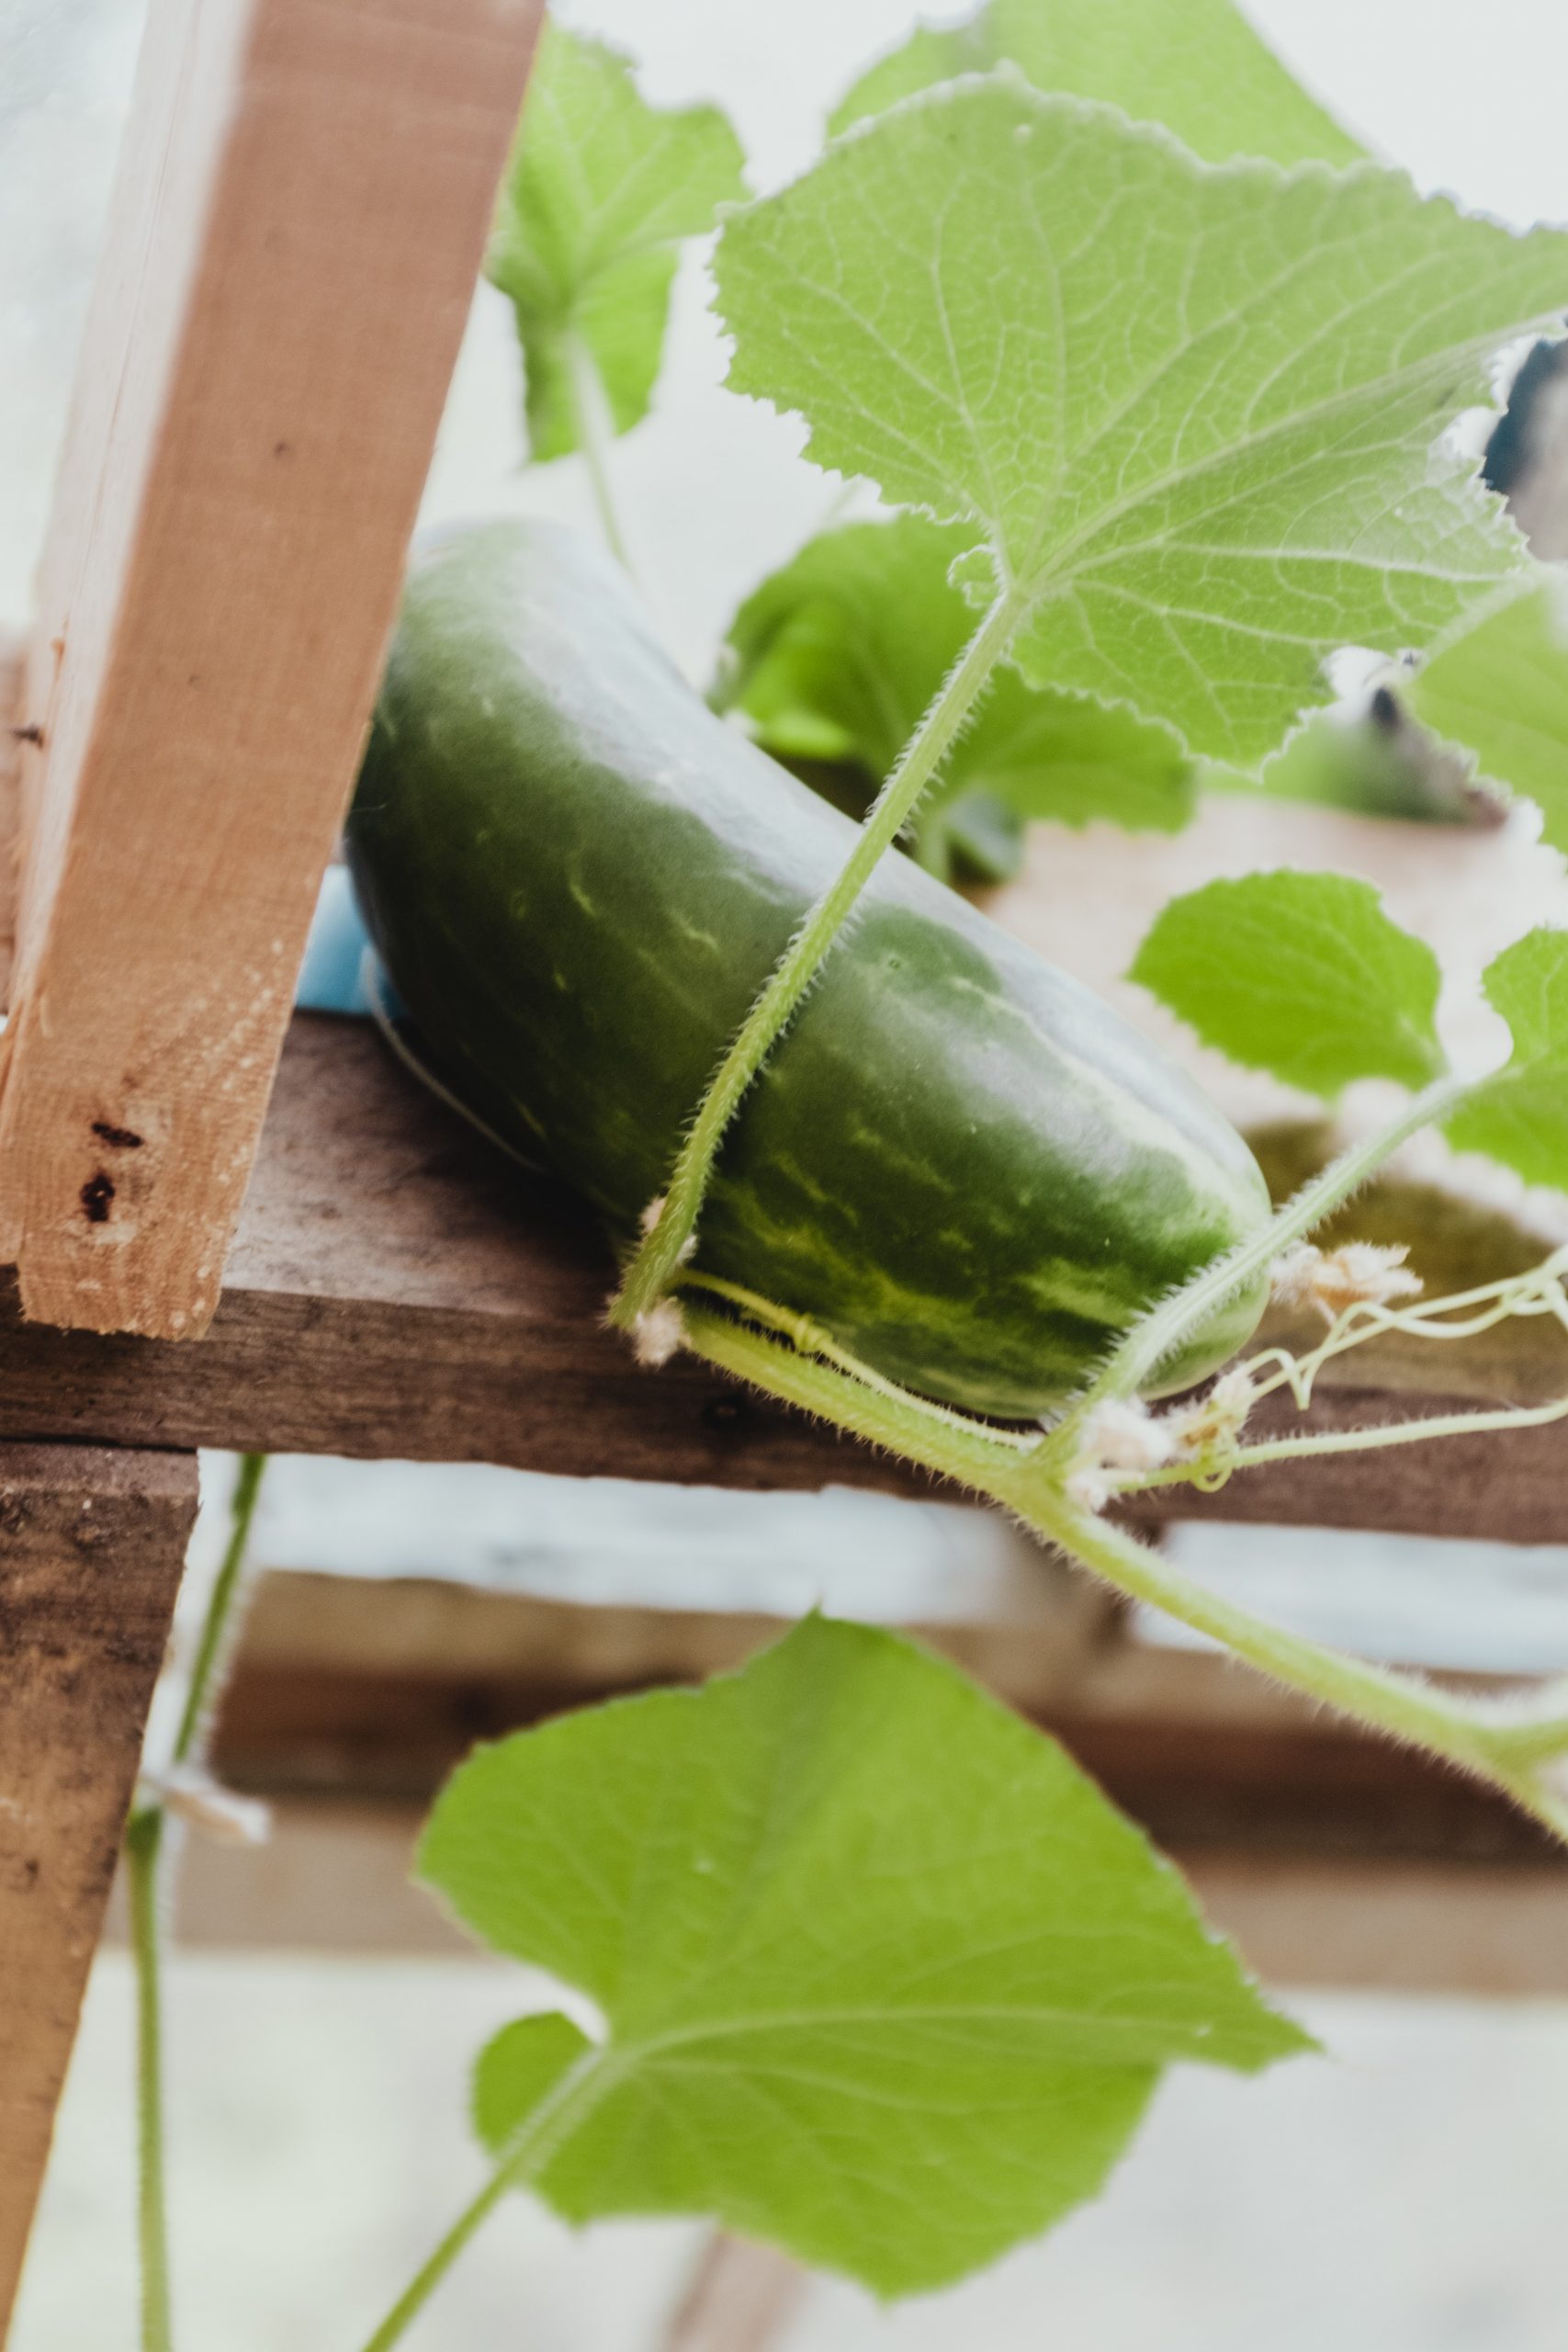 Can You Plant Seeds From A Store Bought Cucumber?